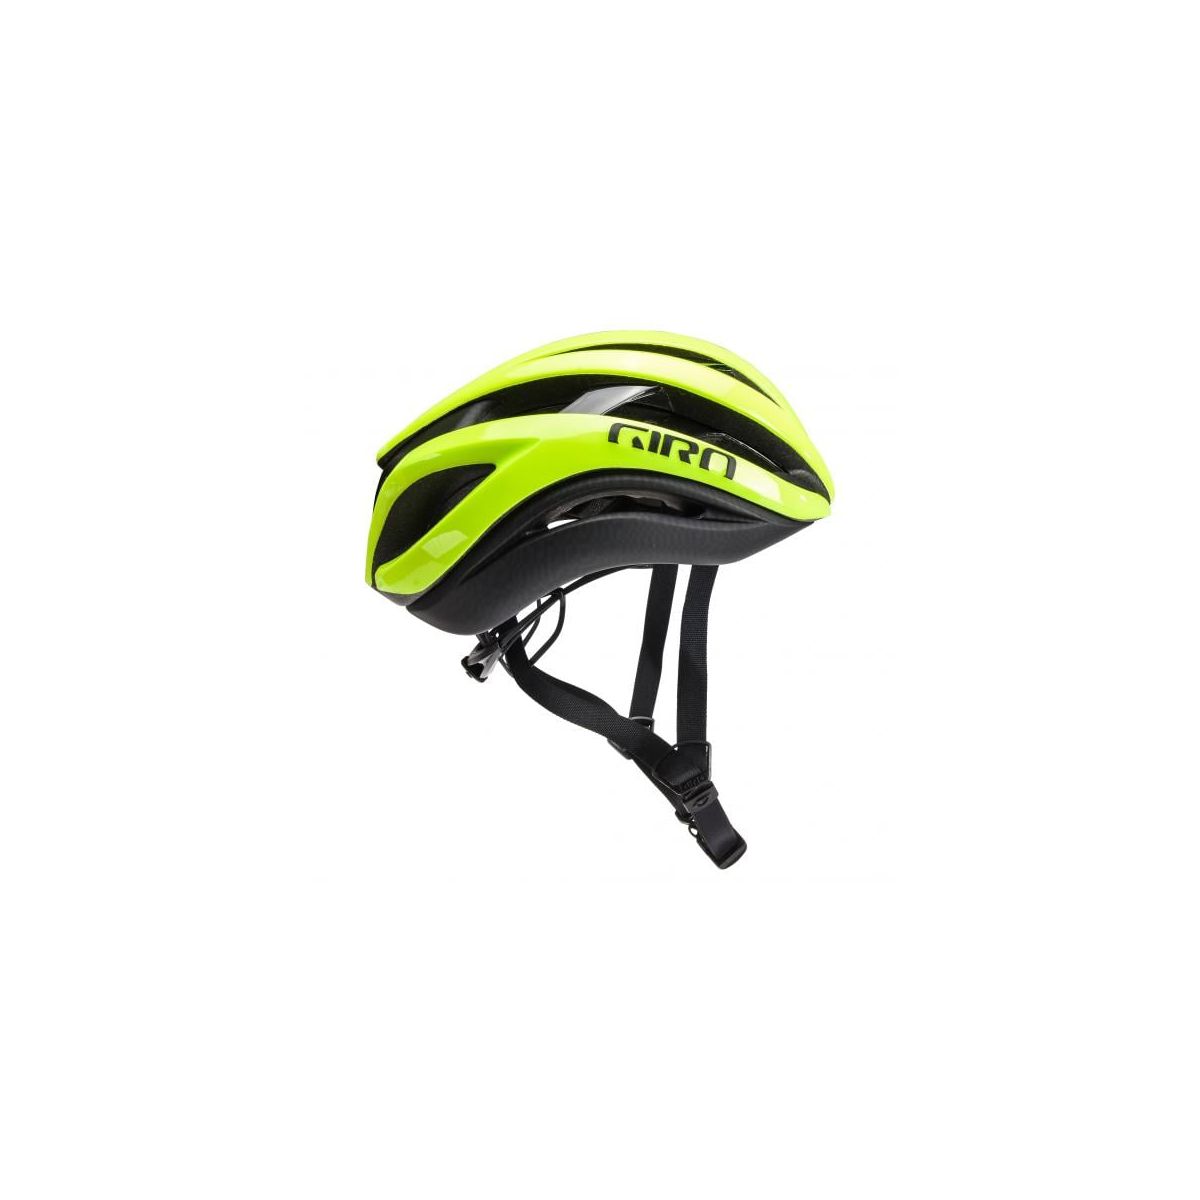 Casco Giro Aether Mips Spherical amarillo y negro Talla M -OUTLET -